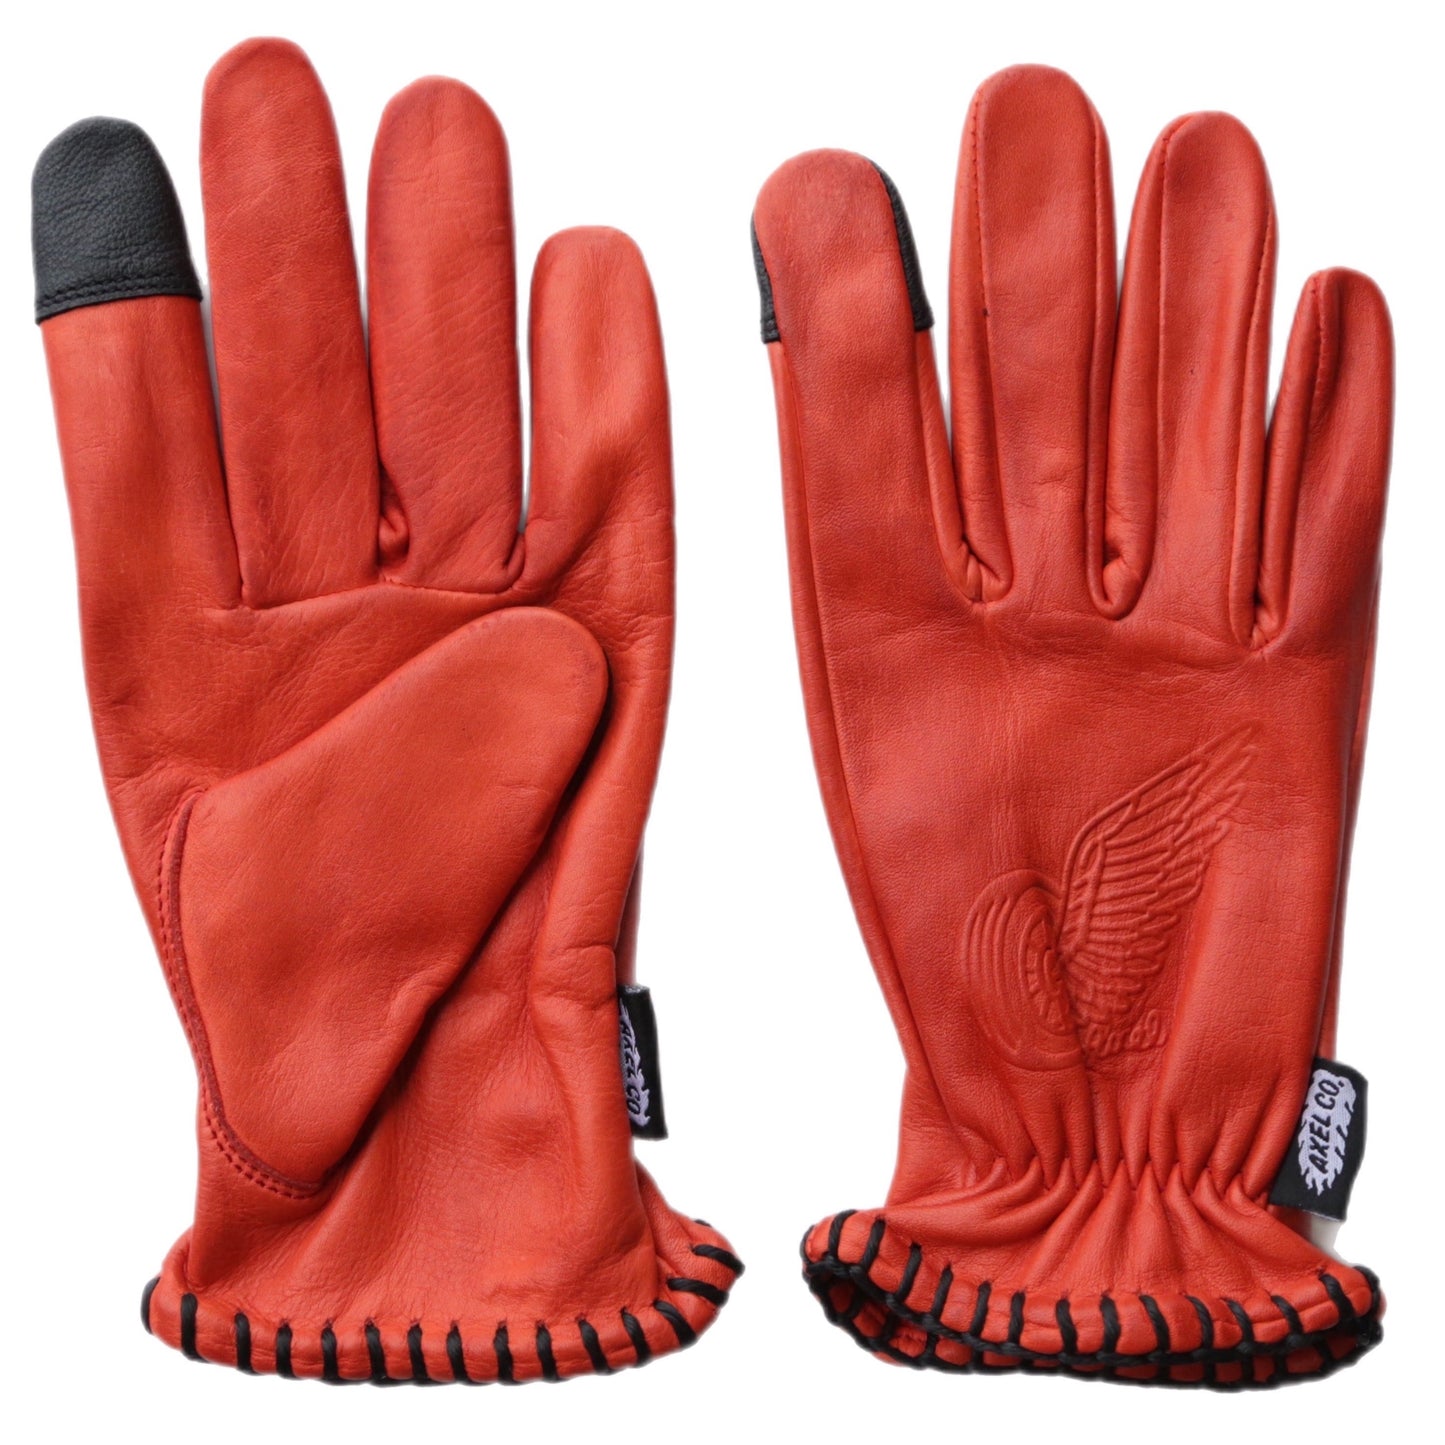 GLOVES: OILED BLOOD RED